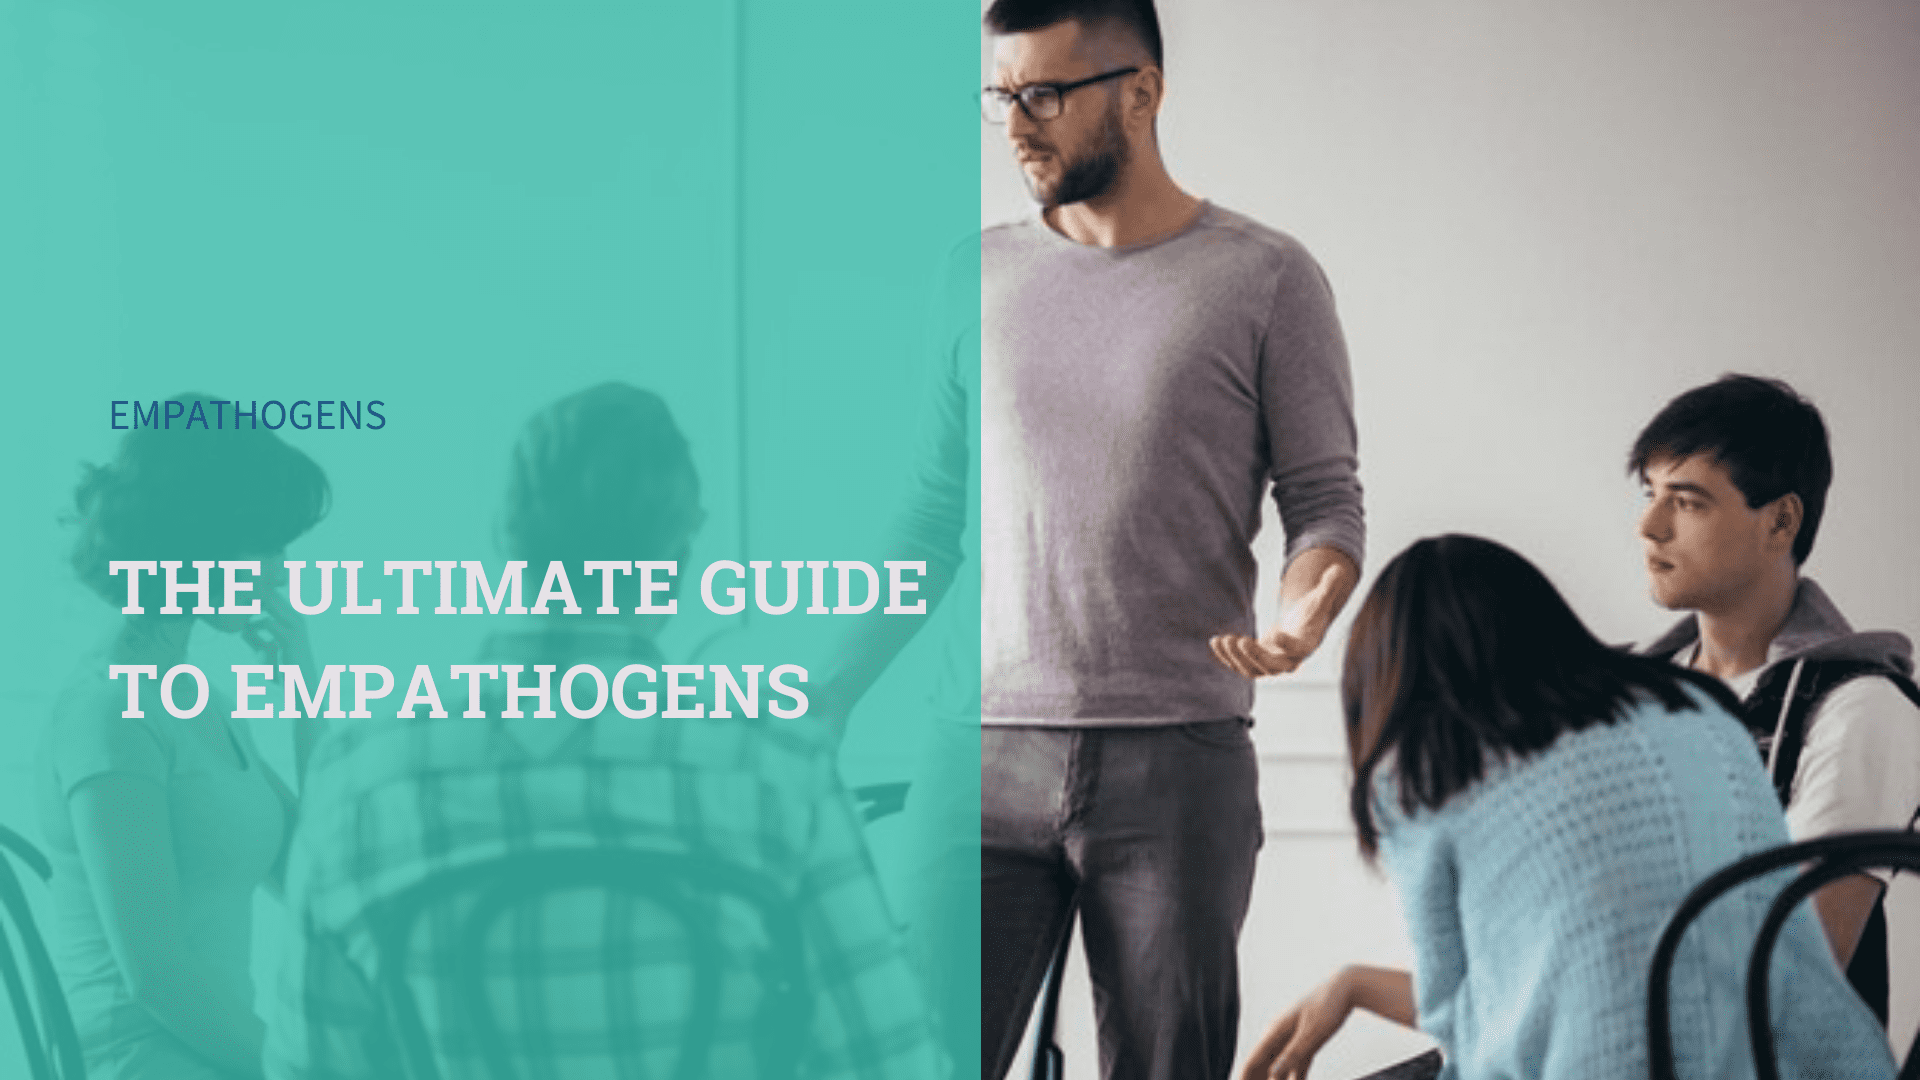 The Ultimate Guide to Empathogens